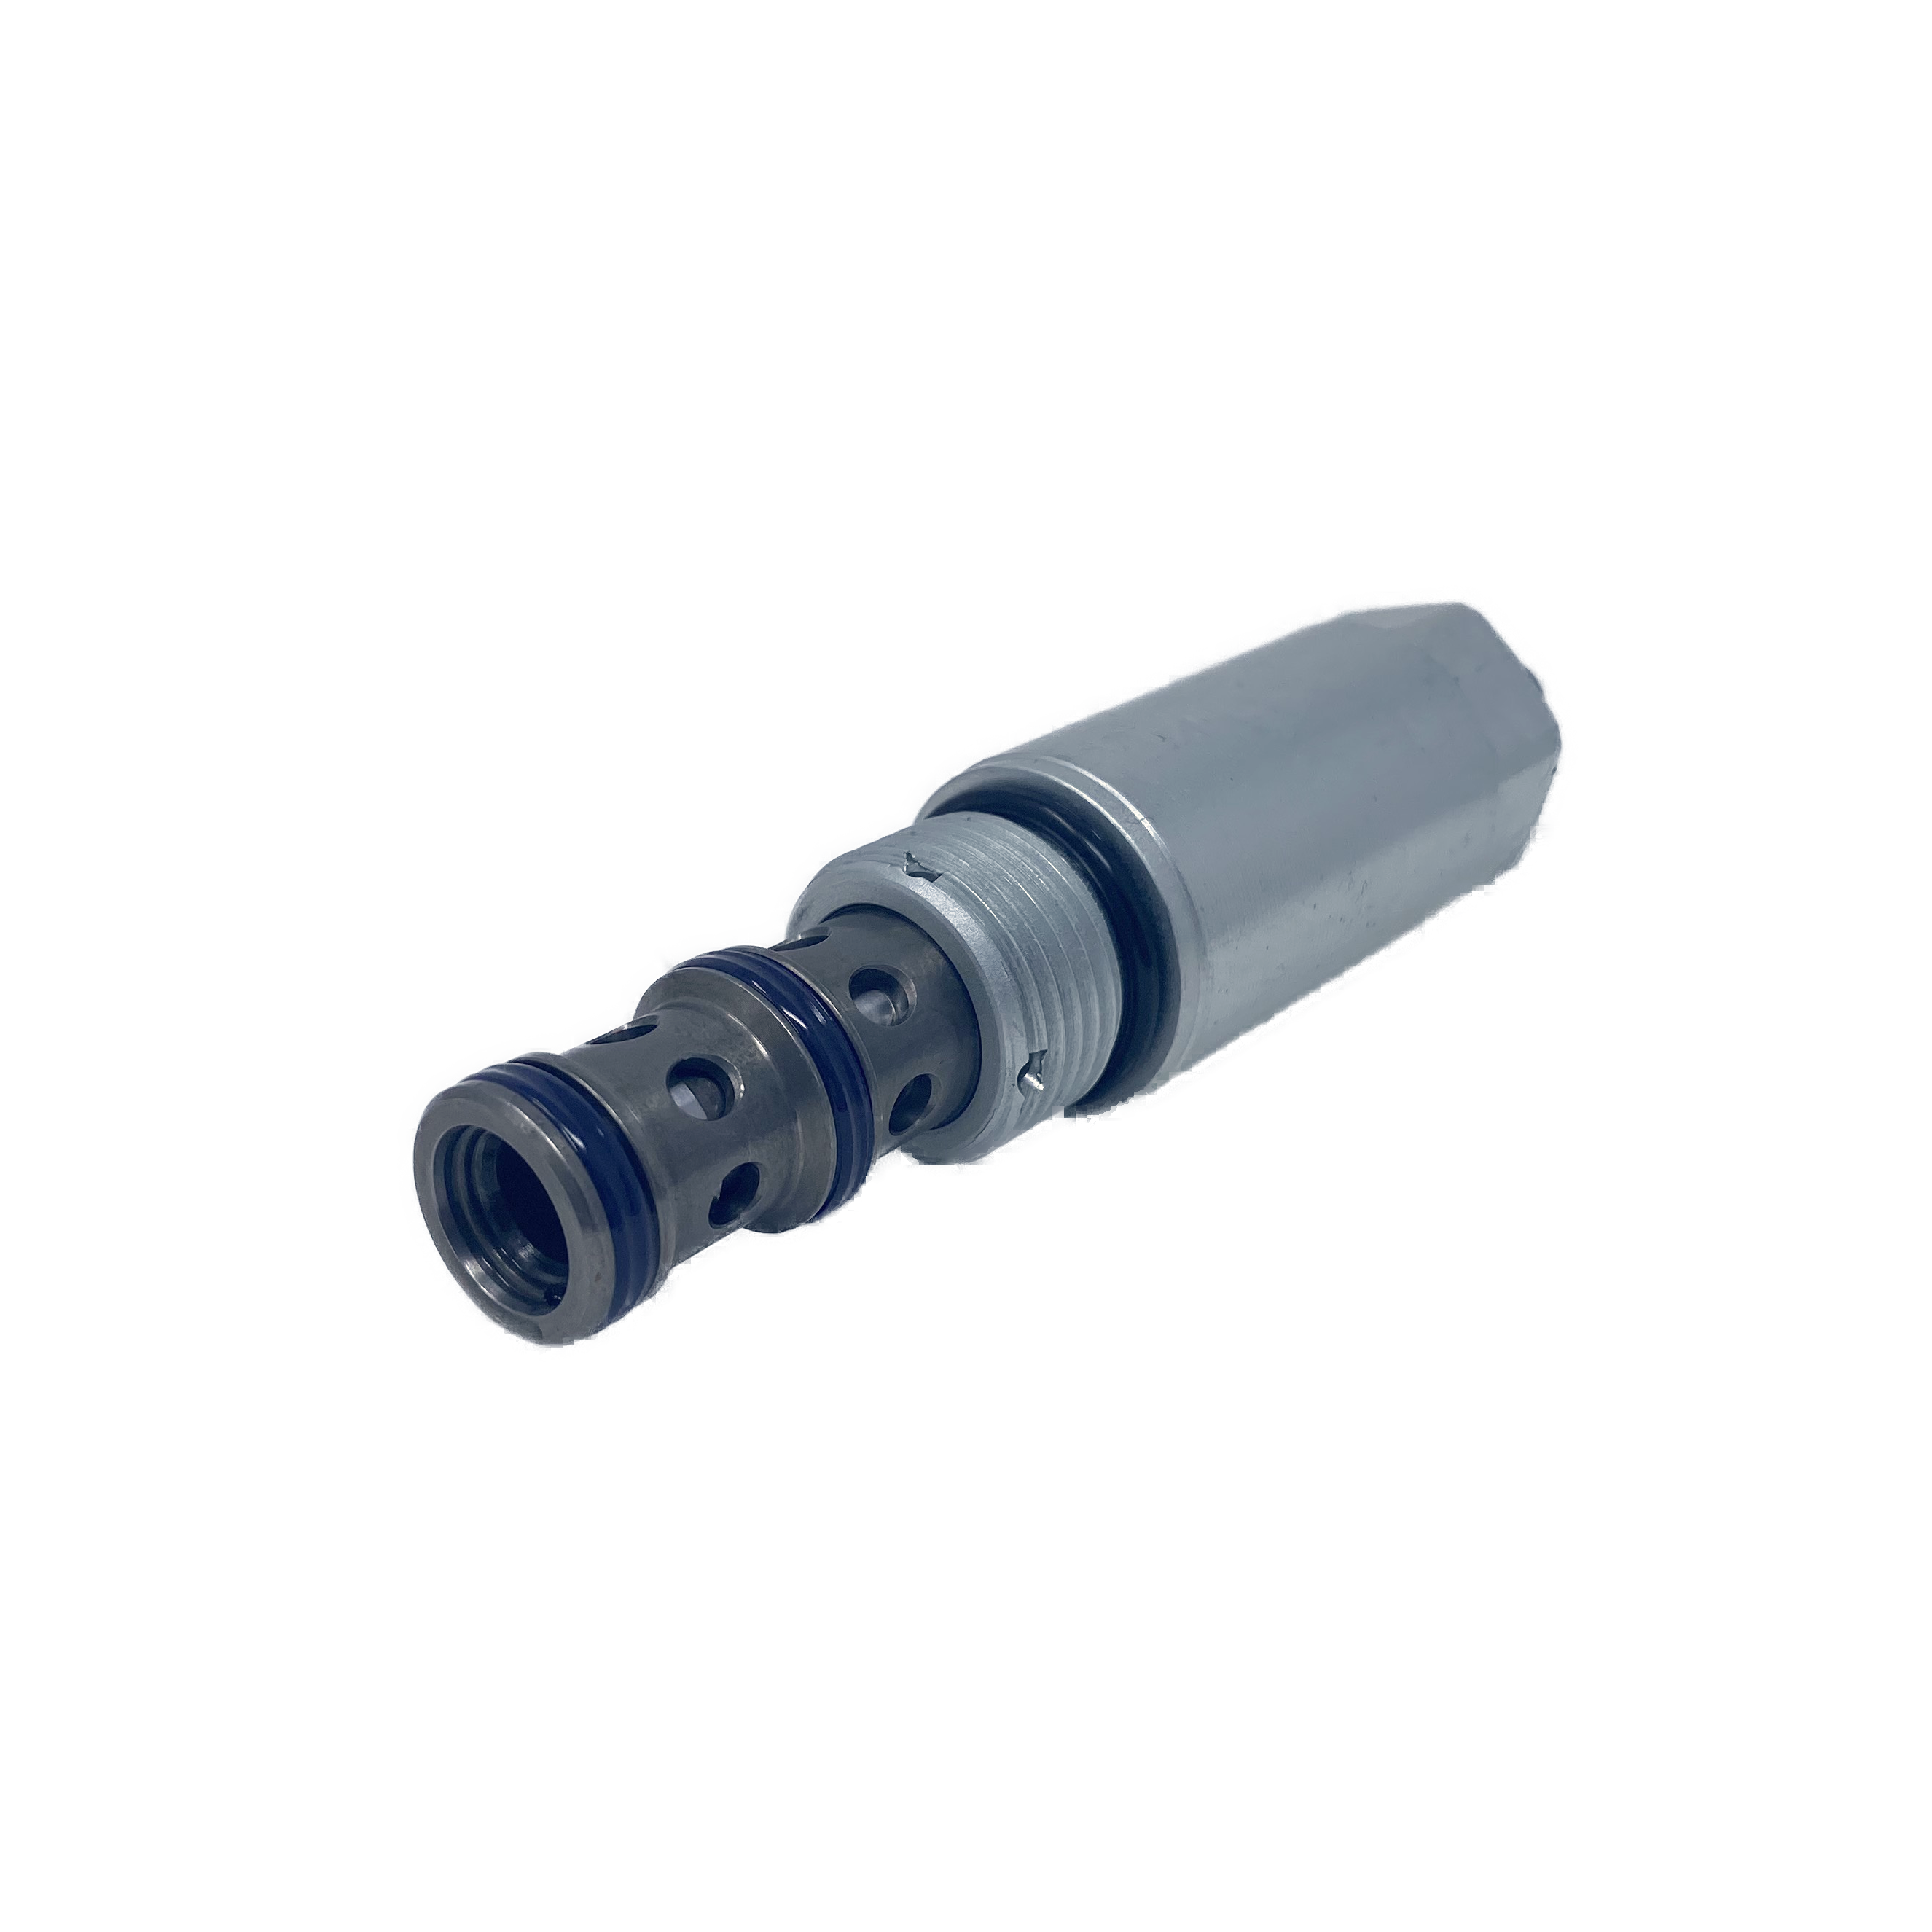 SP4A-B3/H6S-A : Argo Pressure Reducing-Relieving Valve, Spool Type, Pilot Operated, 16 GPM, 6100psi rated, Up to 910psi Adjustment Range, Allen Key Screw, C-10-3